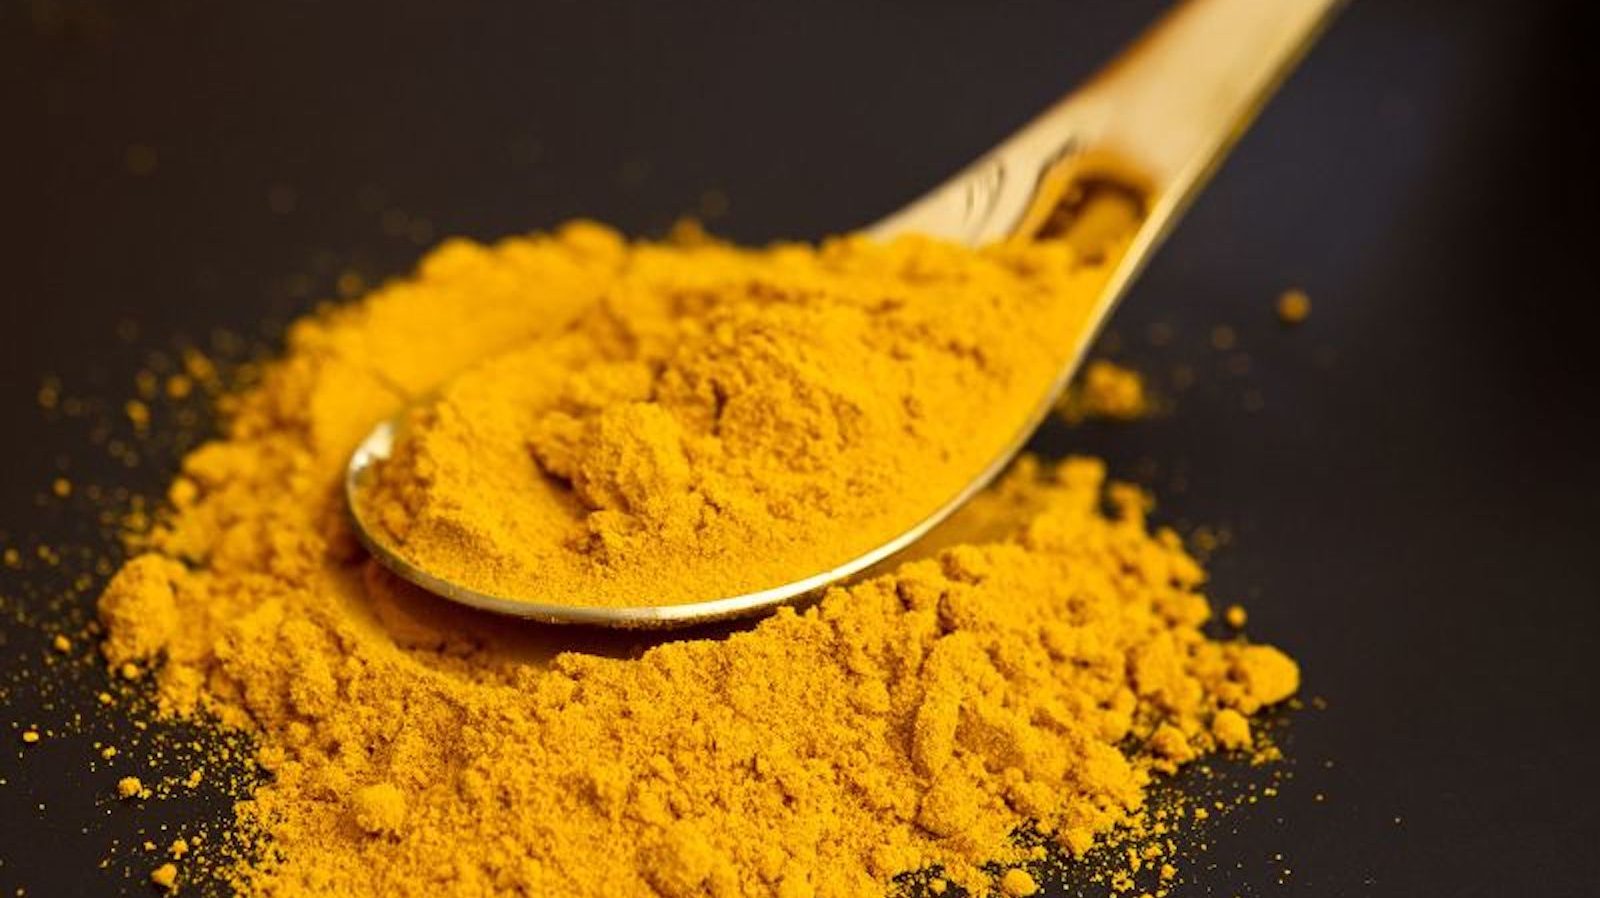 Turmeric could help treat indigestion, according to a study